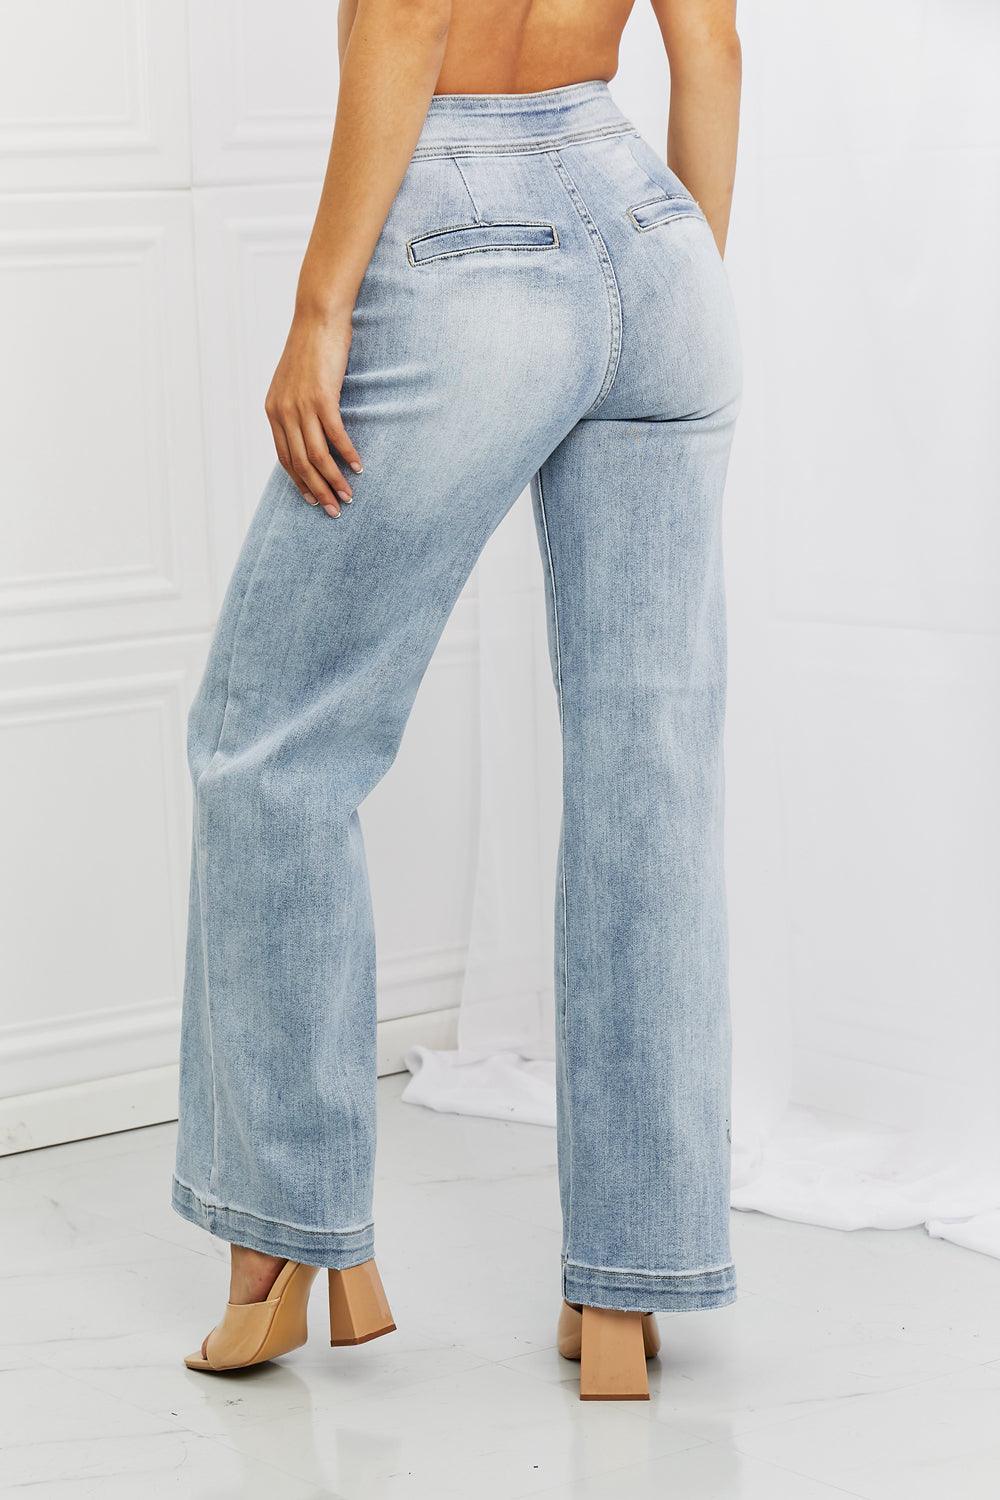 Chill Mode High Rise Wide Leg Button Fly Jeans - MXSTUDIO.COM